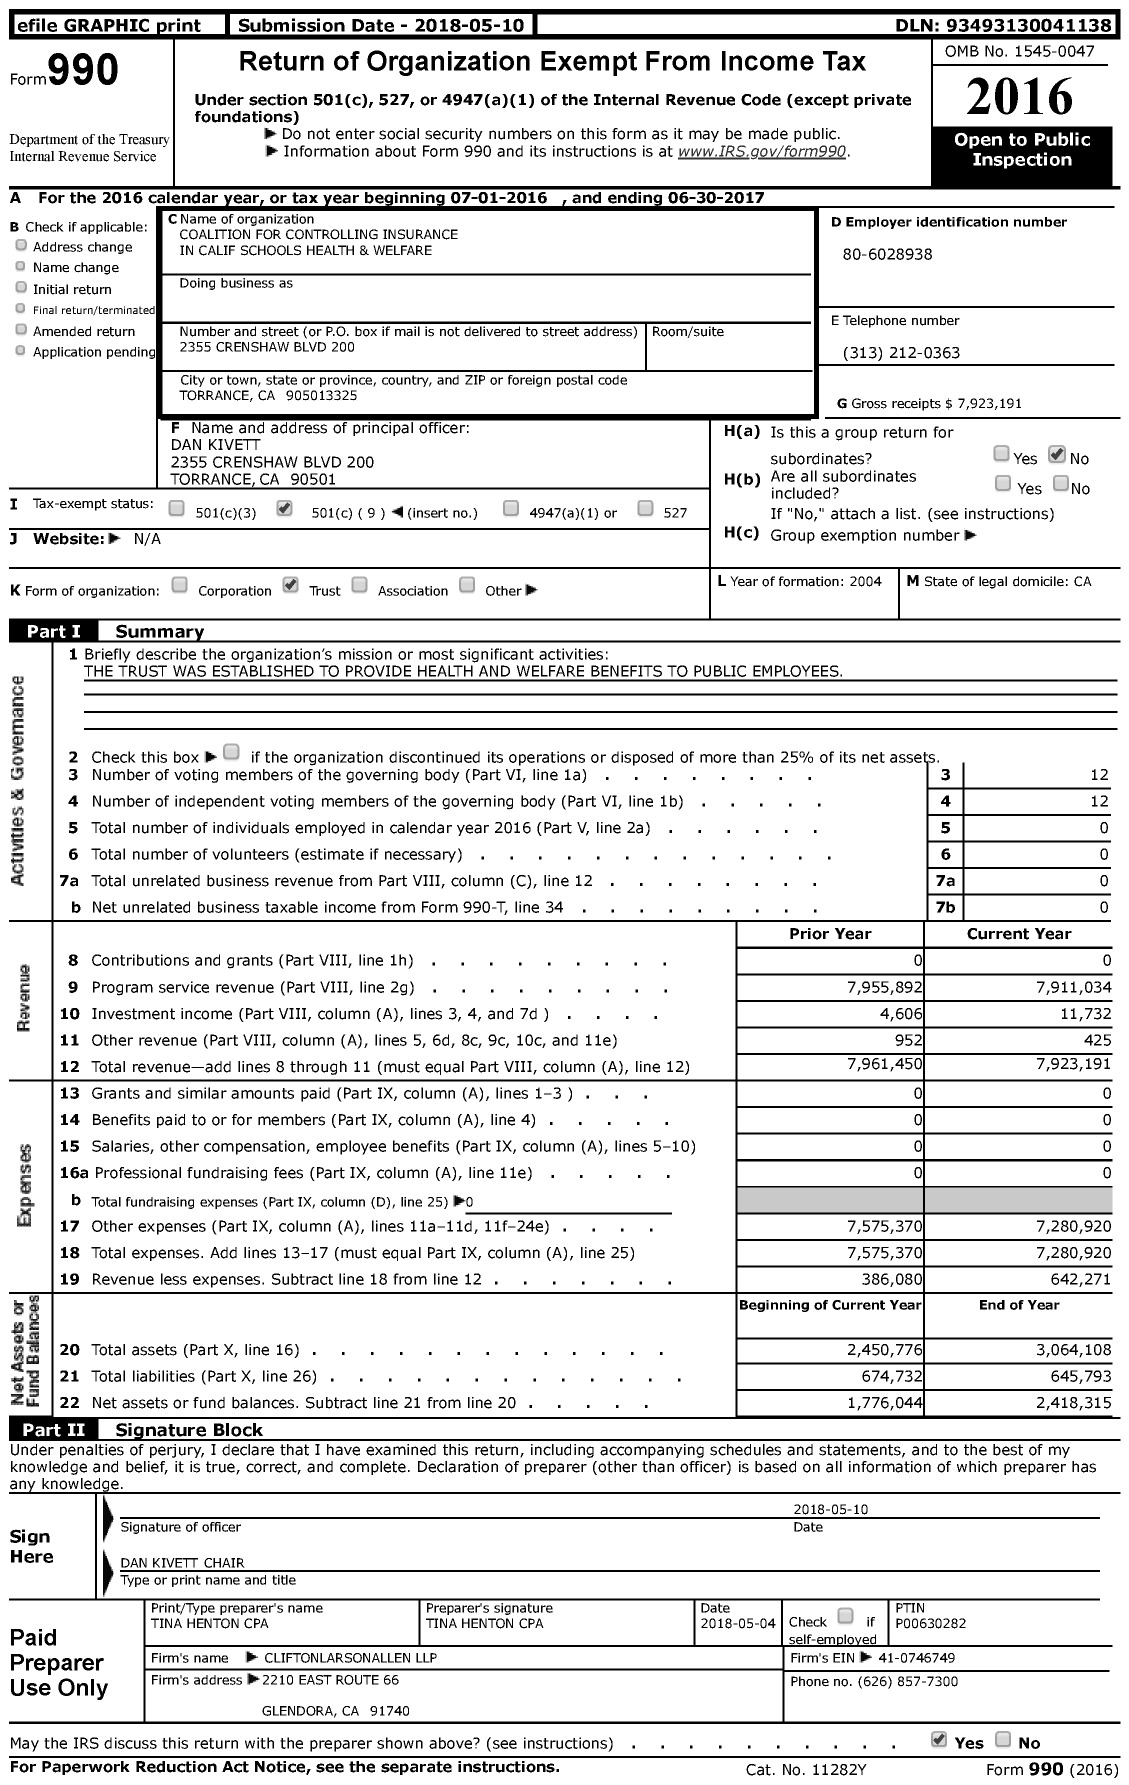 Image of first page of 2016 Form 990 for Coalition for Controlling Insurance in Calif Schools Health and Welfare